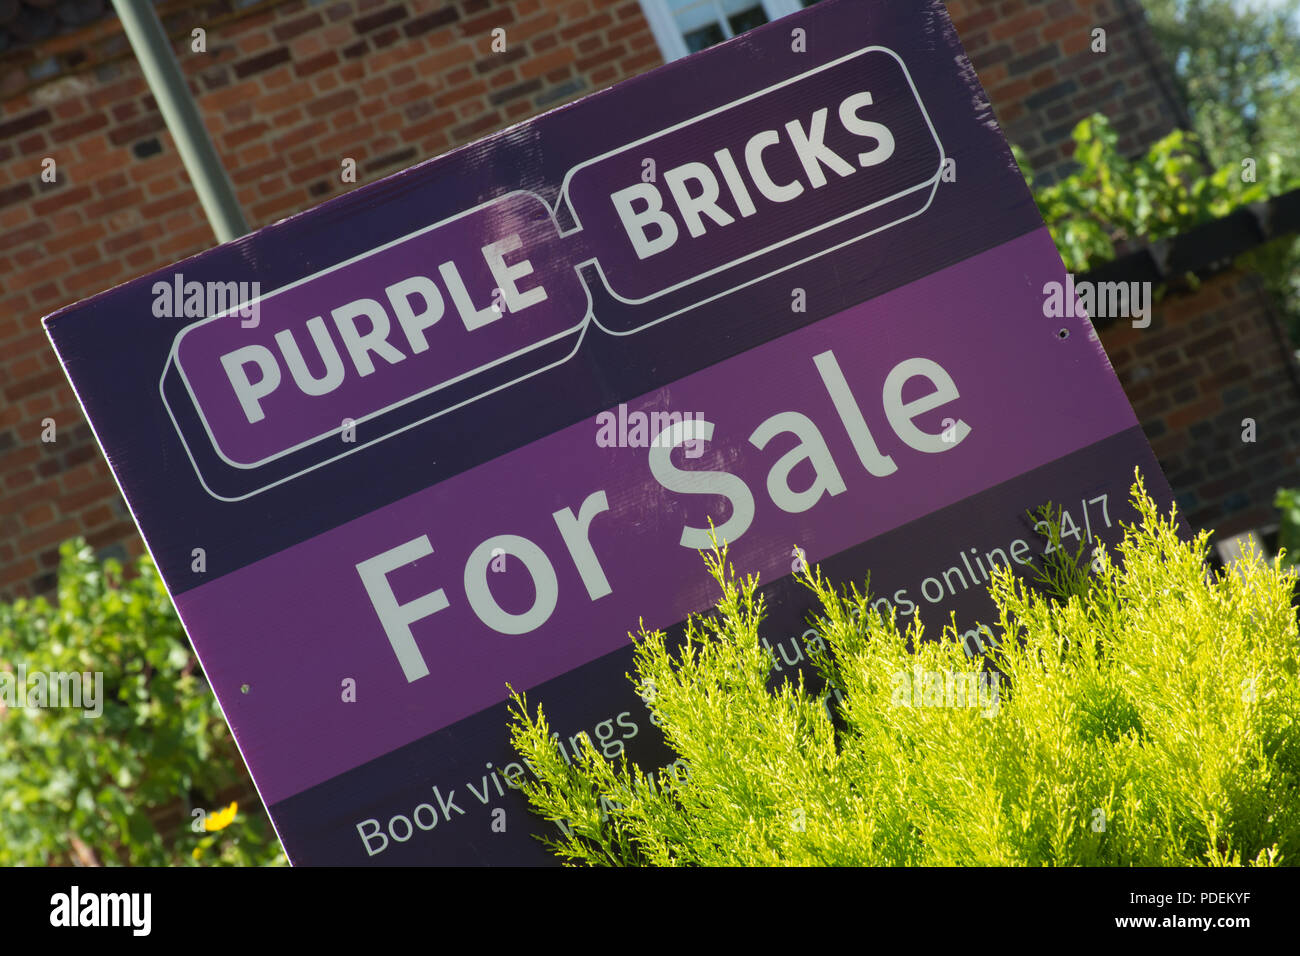 Purple bricks estate agent's for sale sign outside a house in Surrey, UK Stock Photo